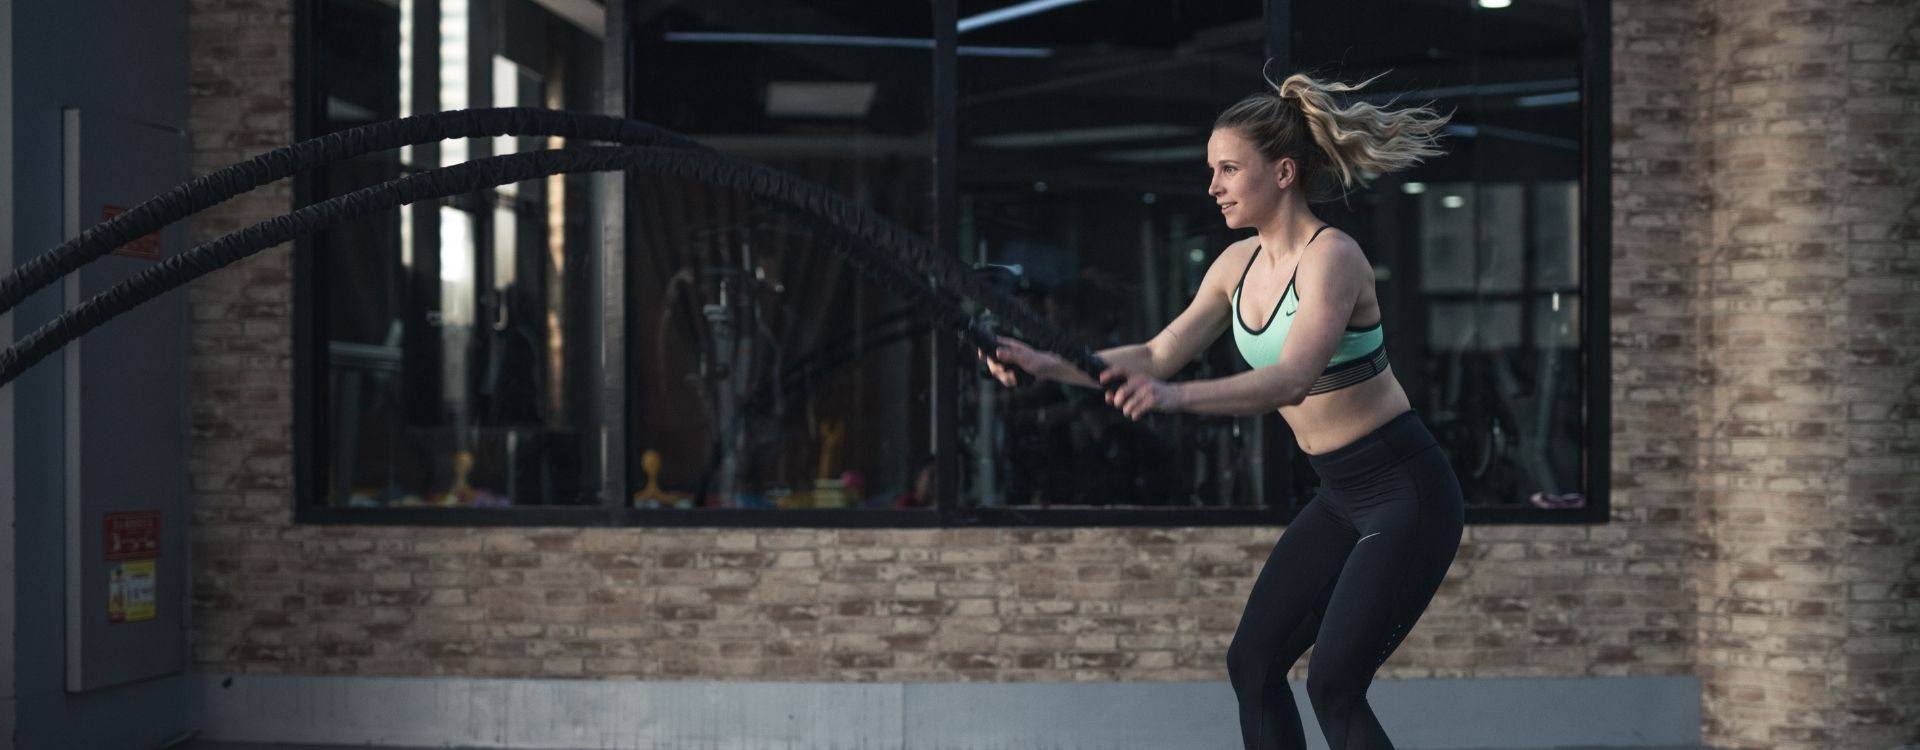 5 Steps to Optimize Your Workout for Performance